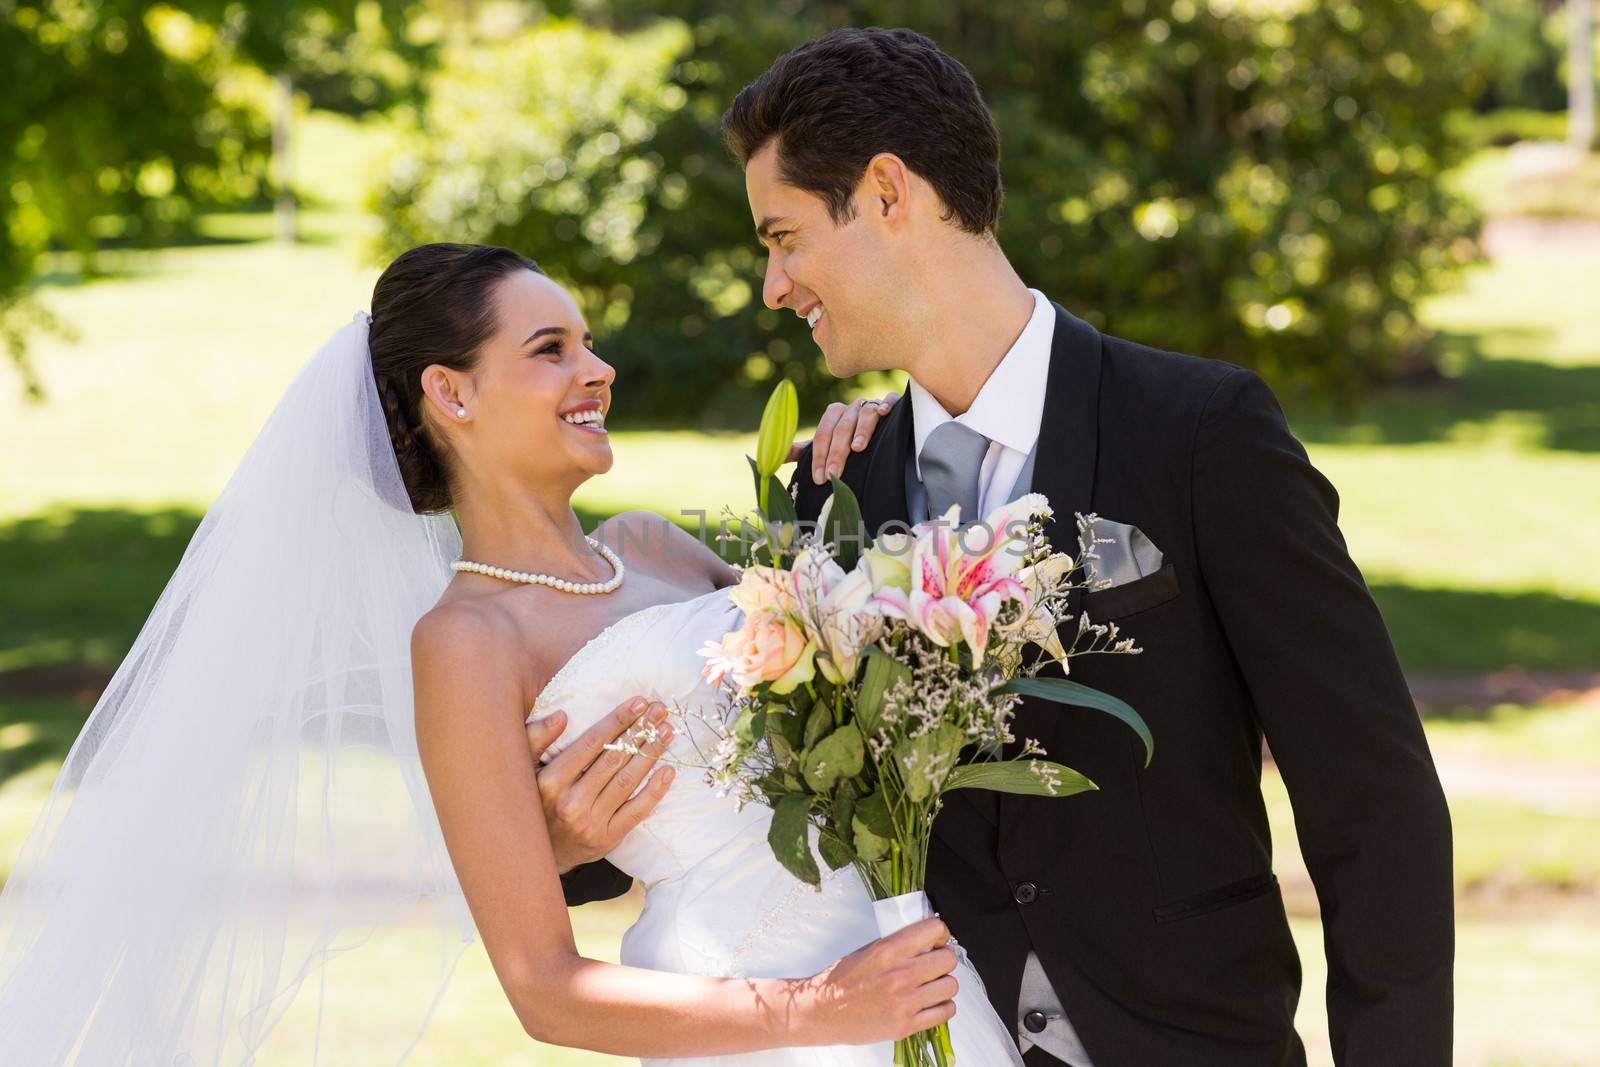 Romantic newlywed couple with bouquet in park by Wavebreakmedia